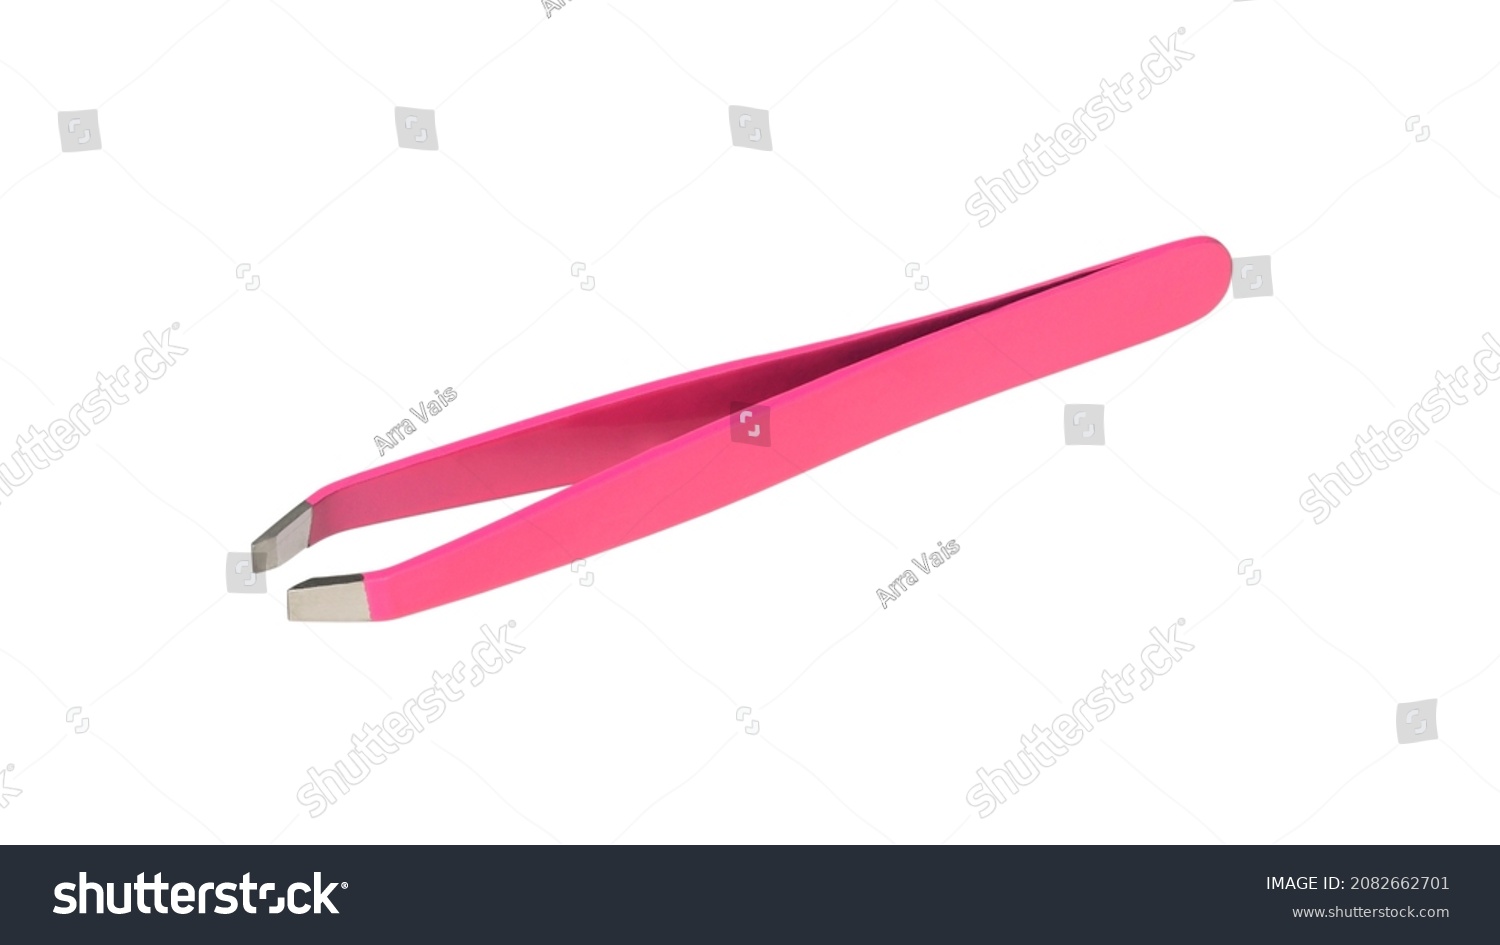 Bright pink cosmetic eyebrow tweezers isolated on white background #2082662701